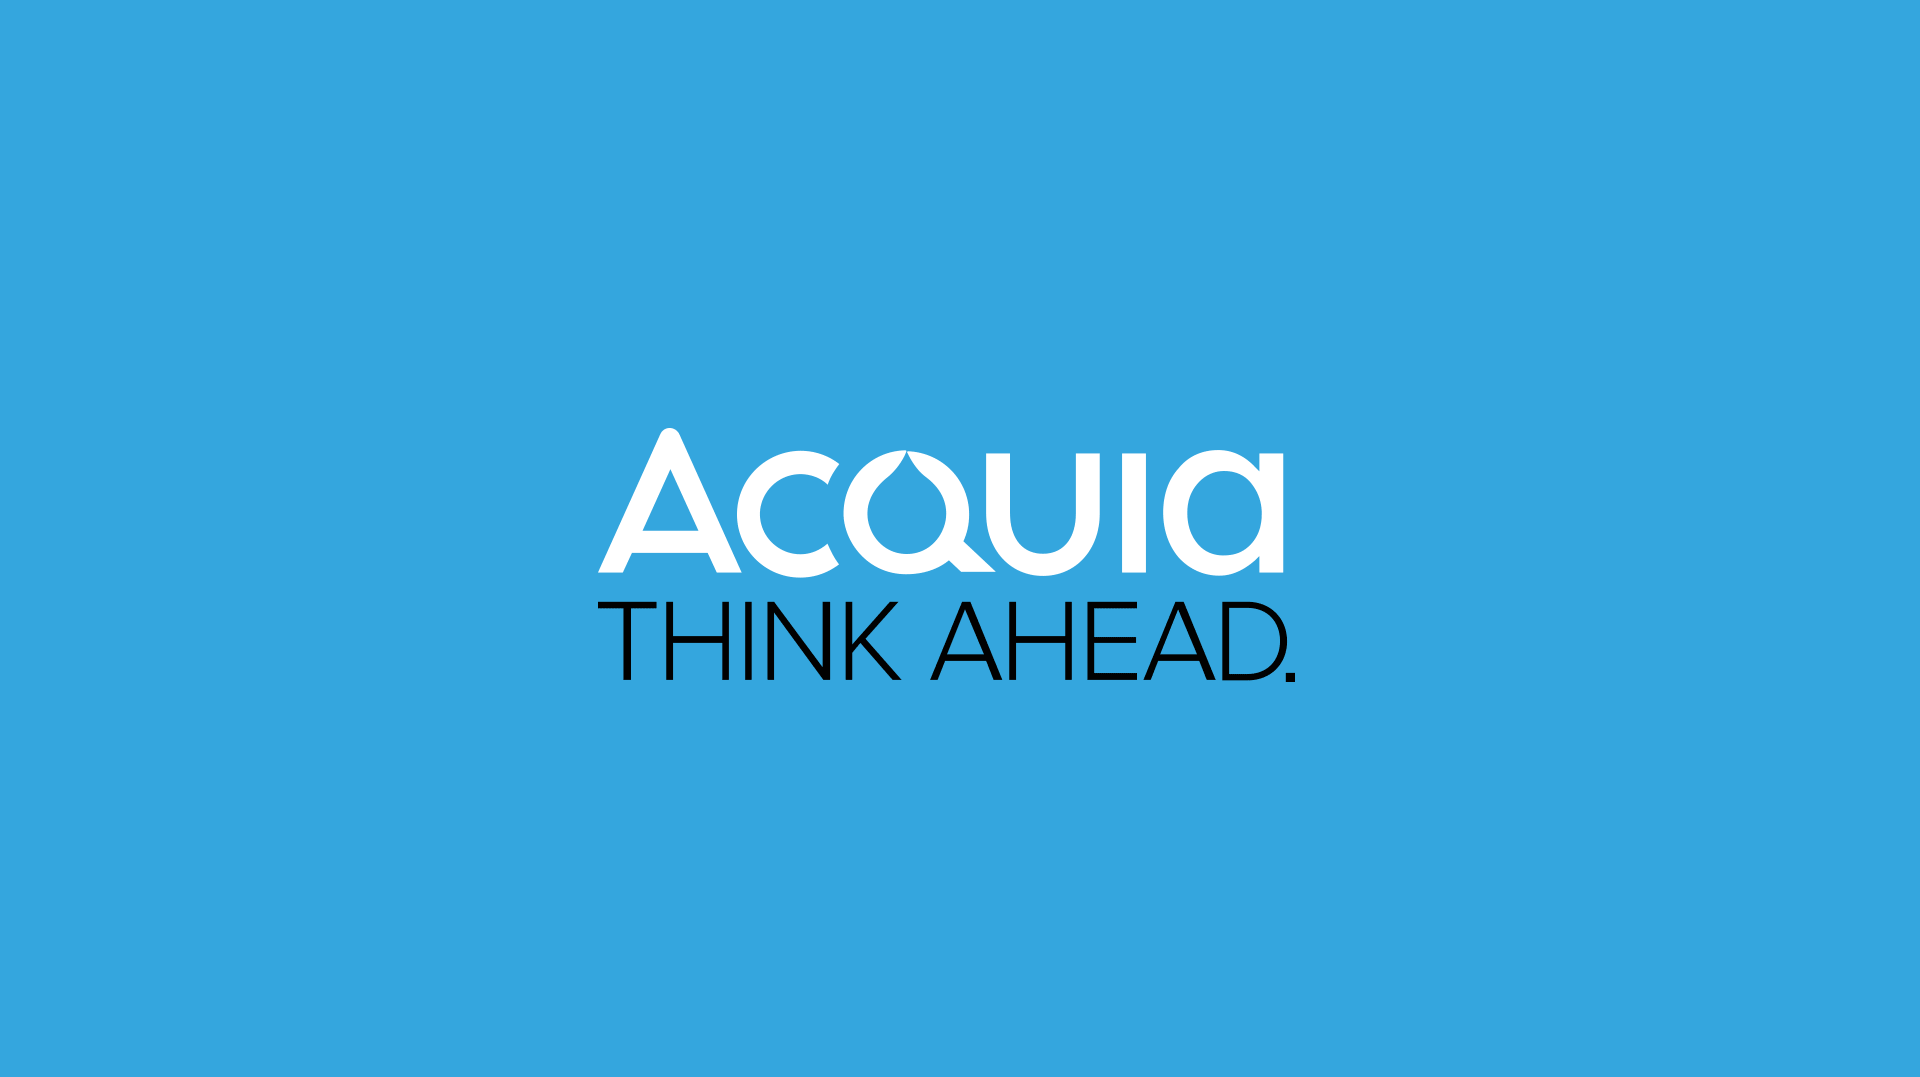 JSA are now Acquia partners